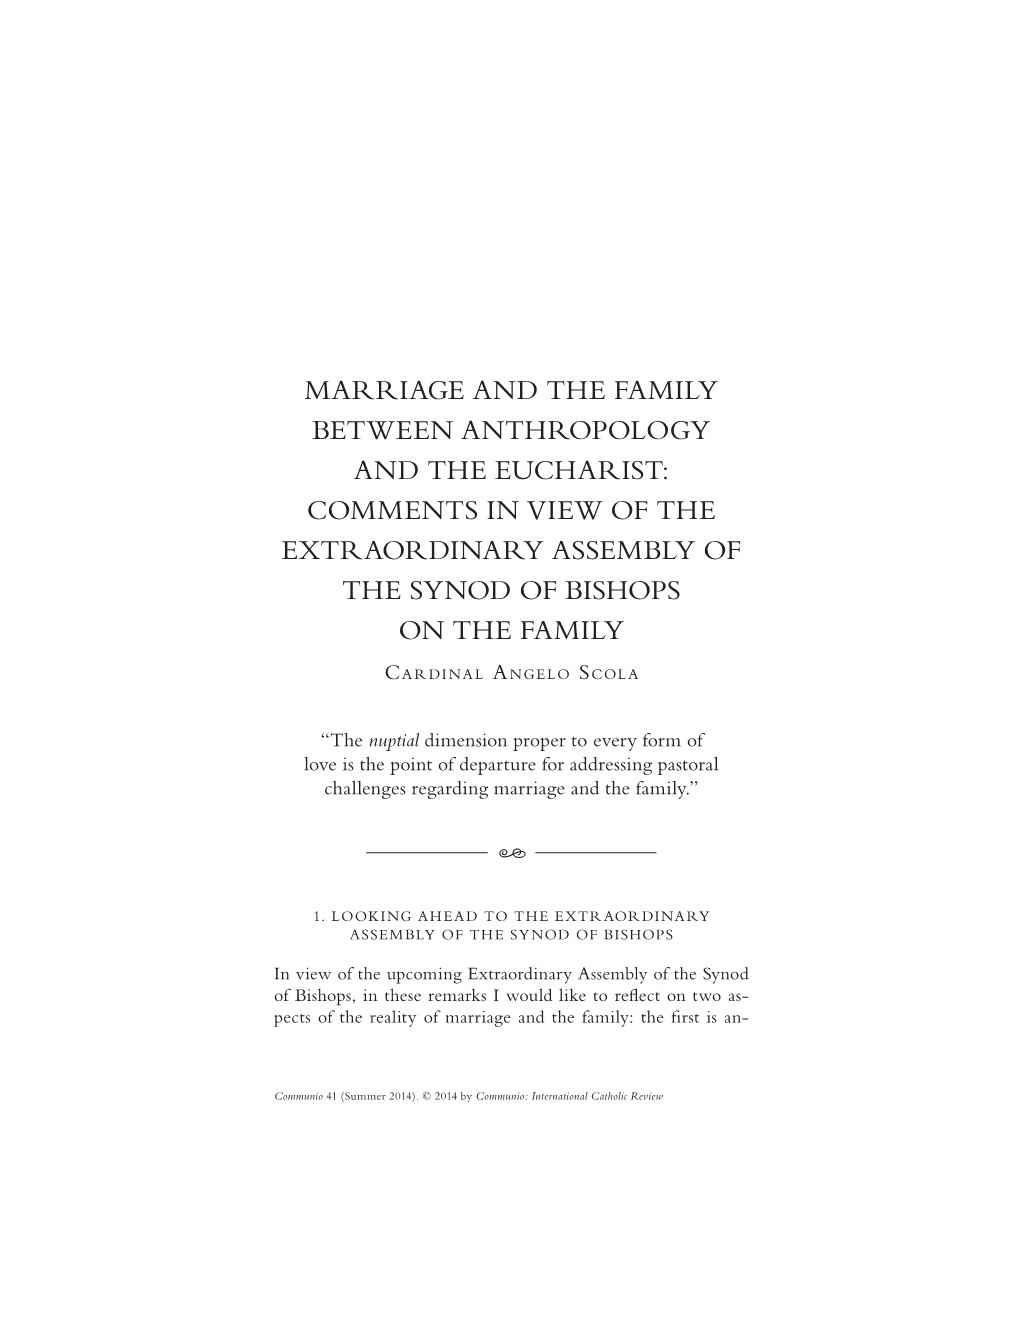 Marriage and the Family Between Anthropology and the Eucharist: Comments in View of the Extraordinary Assembly of the Synod of Bishops on the Family